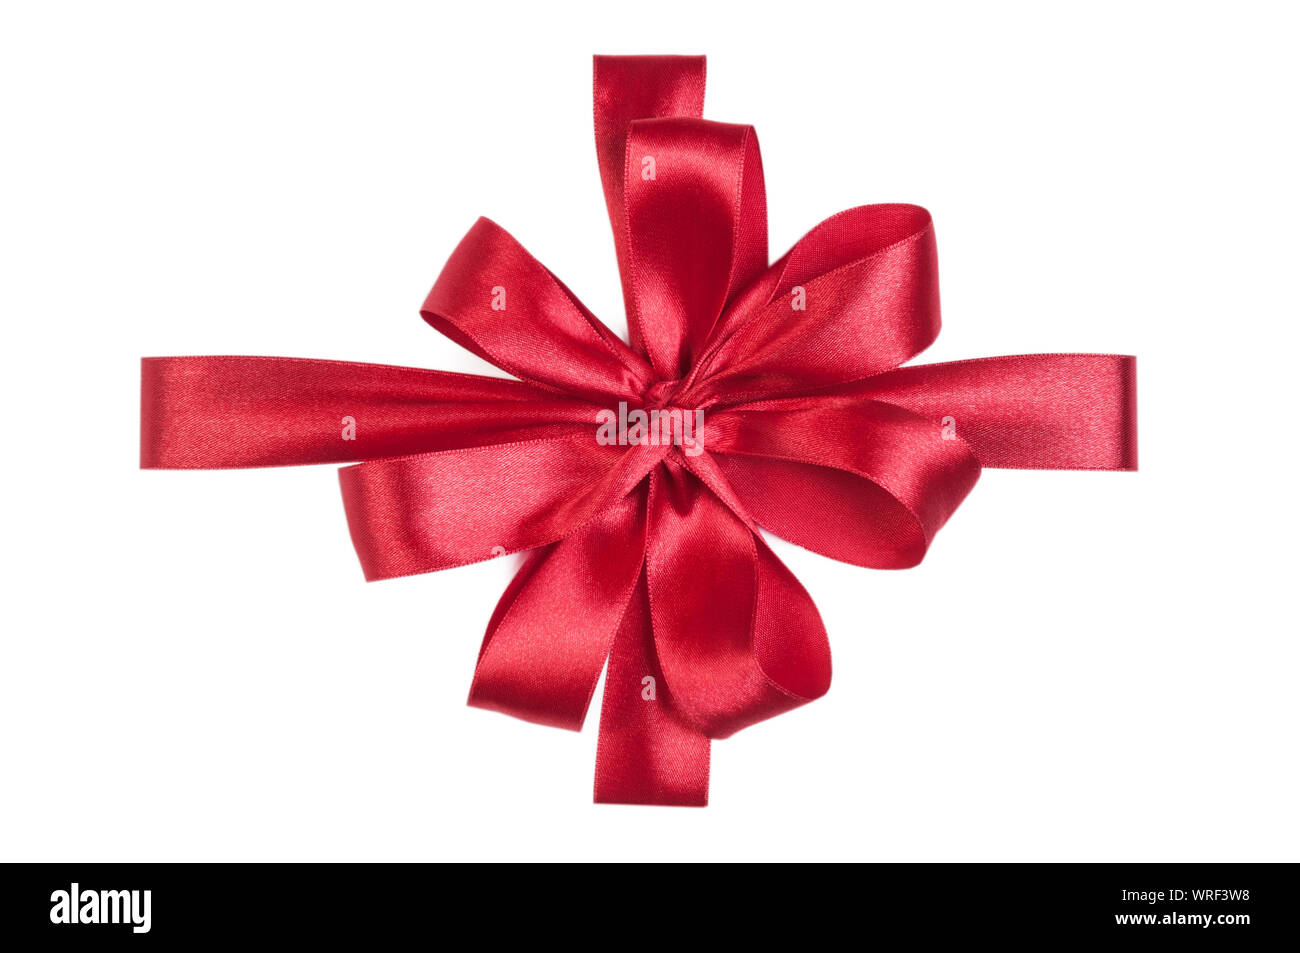 Red Satin Gift Ribbon Decorative Bow - isolated on white background with clipping path Stock Photo